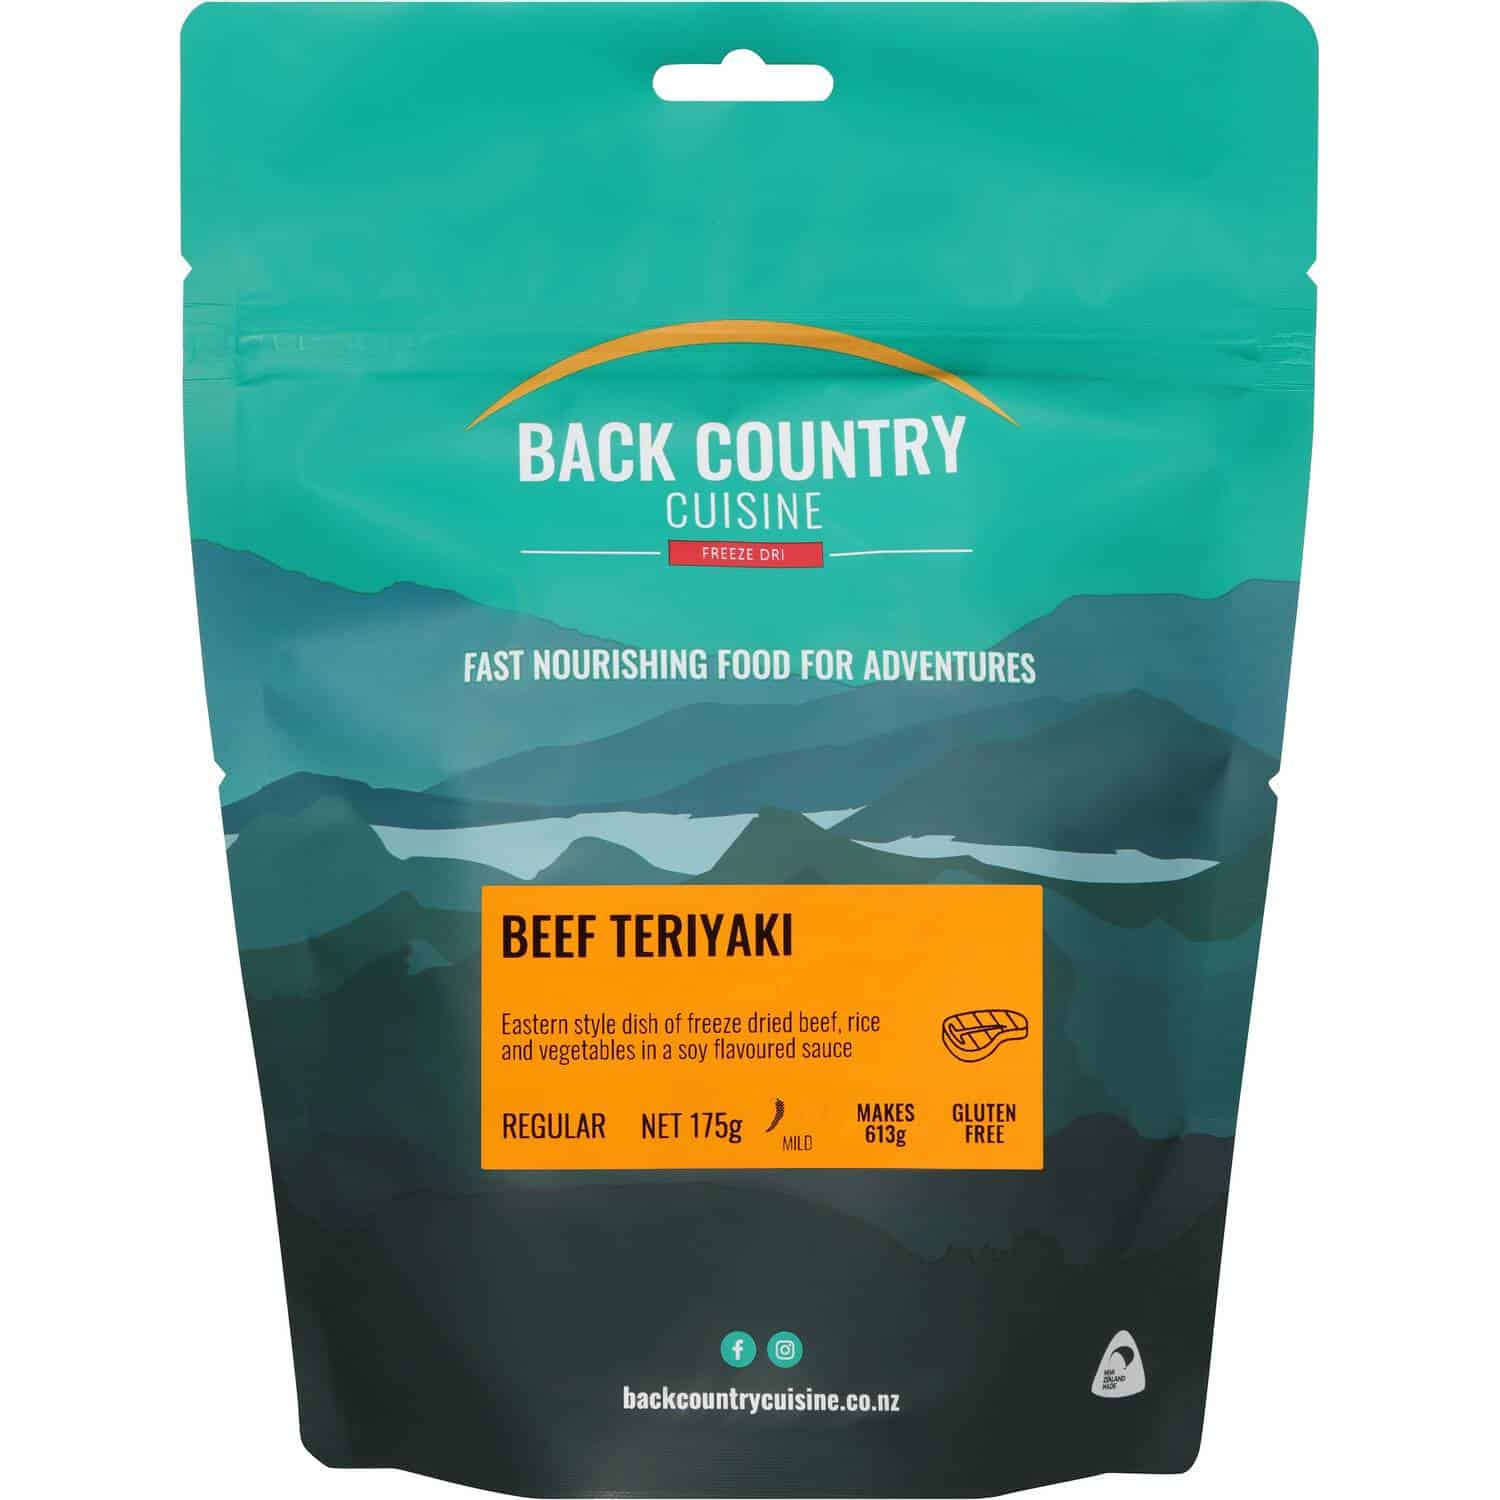 Back Country Cuisine Beef Teriyaki Regular - Tramping Food and Accessories sold by Venture Outdoors NZ